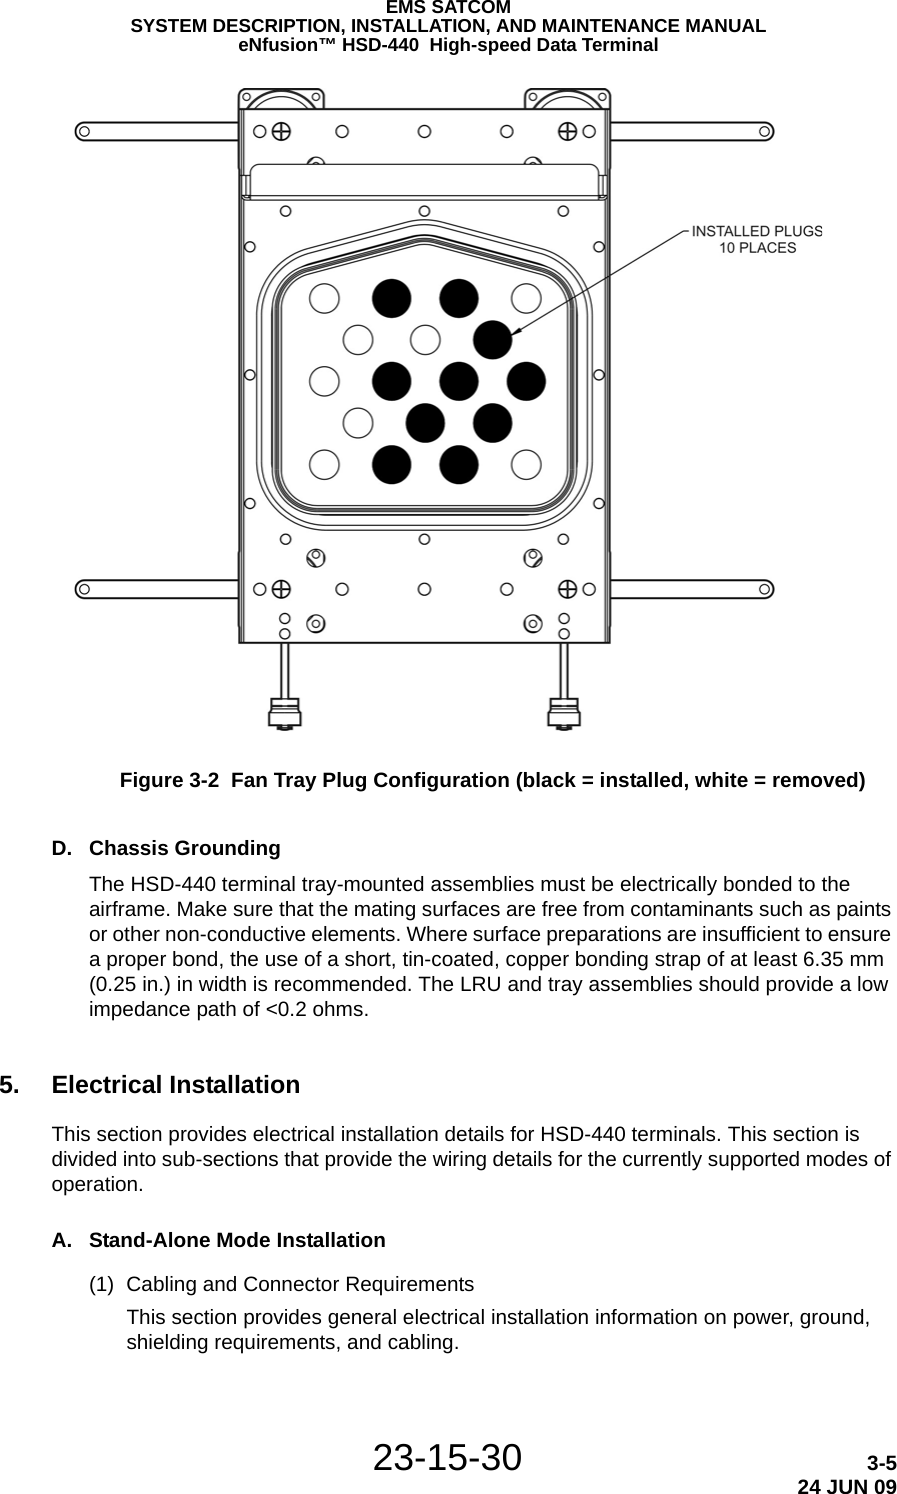 EMS SATCOMSYSTEM DESCRIPTION, INSTALLATION, AND MAINTENANCE MANUALeNfusion™ HSD-440  High-speed Data Terminal23-15-30 3-524 JUN 09Figure 3-2  Fan Tray Plug Configuration (black = installed, white = removed)D. Chassis GroundingThe HSD-440 terminal tray-mounted assemblies must be electrically bonded to the airframe. Make sure that the mating surfaces are free from contaminants such as paints or other non-conductive elements. Where surface preparations are insufficient to ensure a proper bond, the use of a short, tin-coated, copper bonding strap of at least 6.35 mm (0.25 in.) in width is recommended. The LRU and tray assemblies should provide a low impedance path of &lt;0.2 ohms.5. Electrical InstallationThis section provides electrical installation details for HSD-440 terminals. This section is divided into sub-sections that provide the wiring details for the currently supported modes of operation.A. Stand-Alone Mode Installation(1) Cabling and Connector RequirementsThis section provides general electrical installation information on power, ground, shielding requirements, and cabling. 